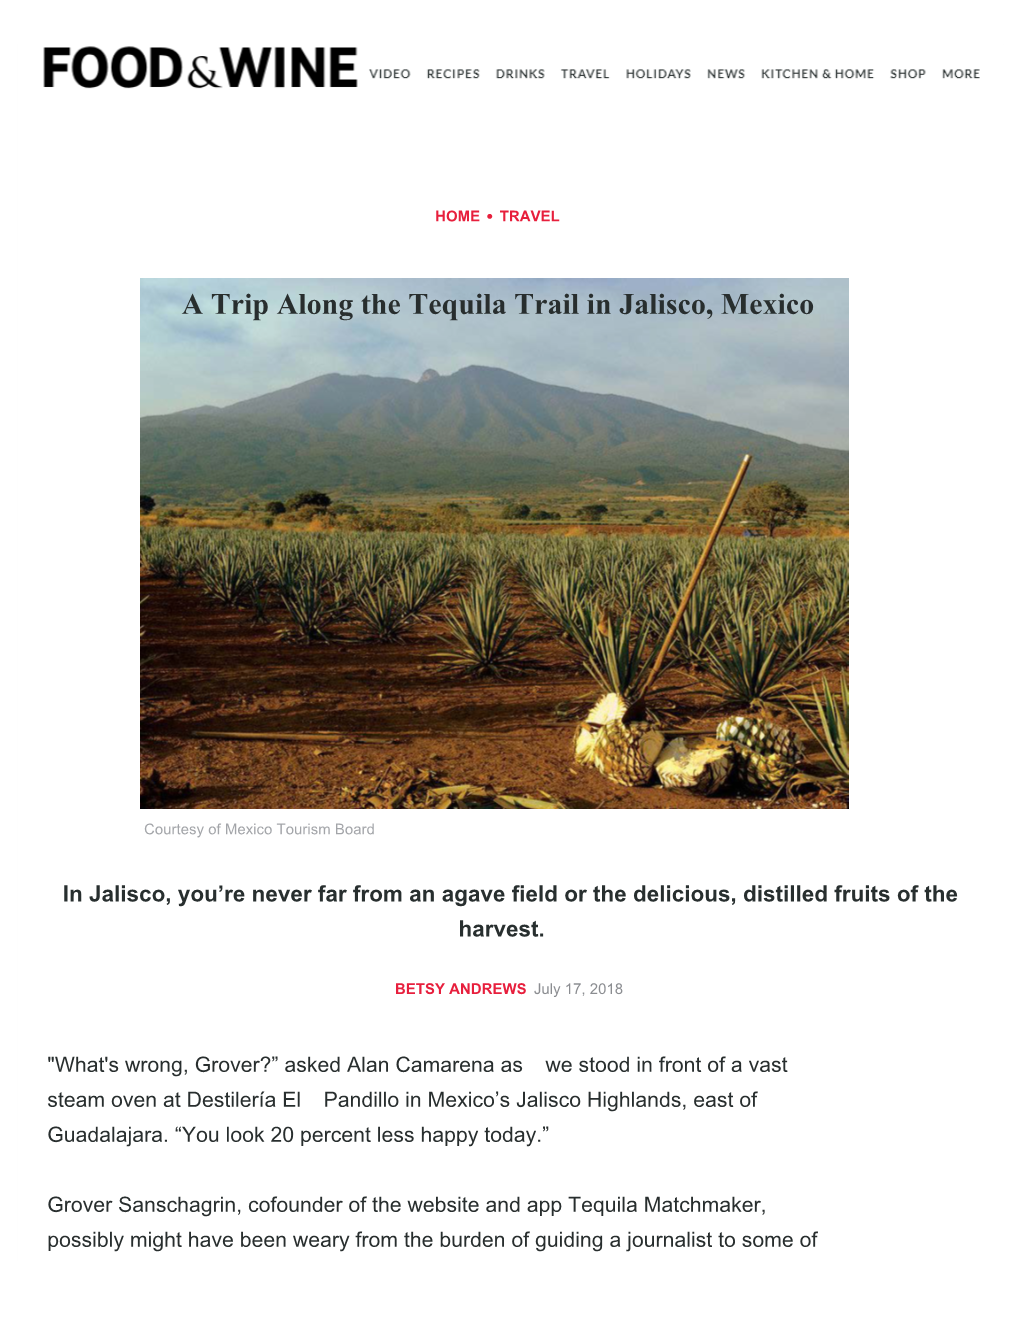 A Trip Along the Tequila Trail in Jalisco, Mexico